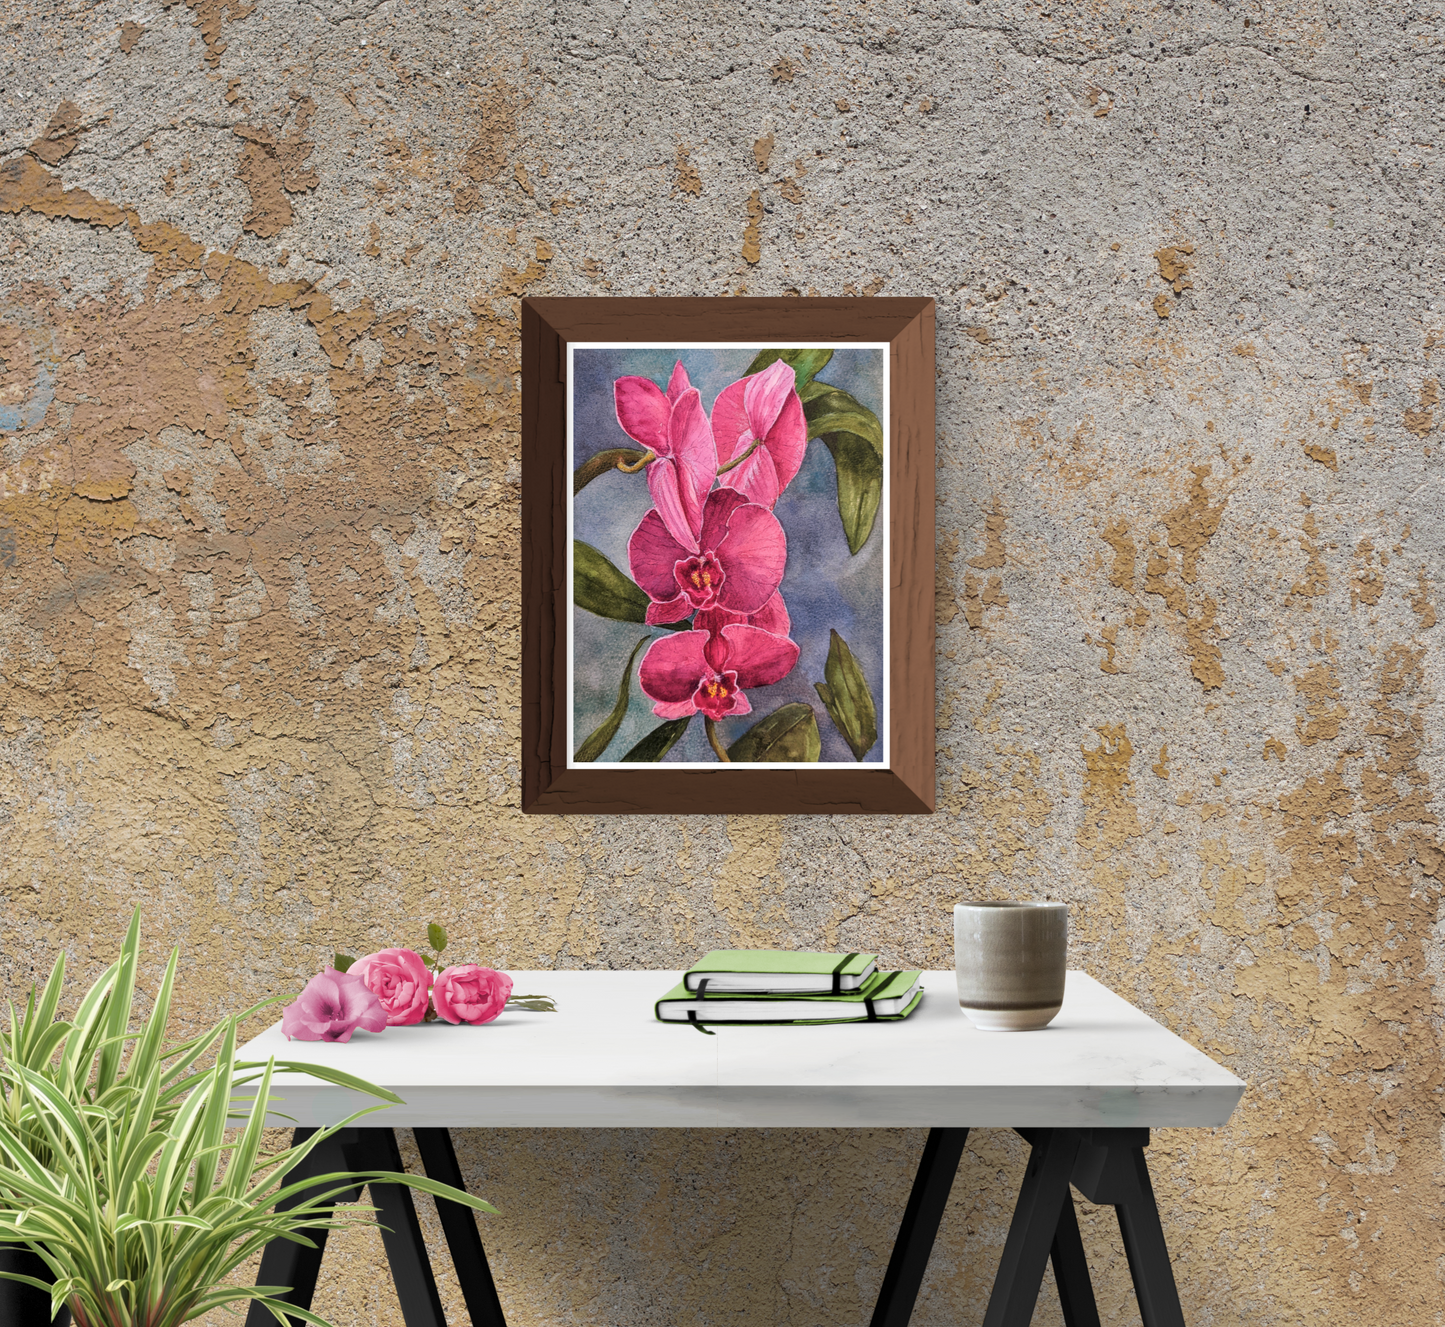 Plum Orchid painting in room setting